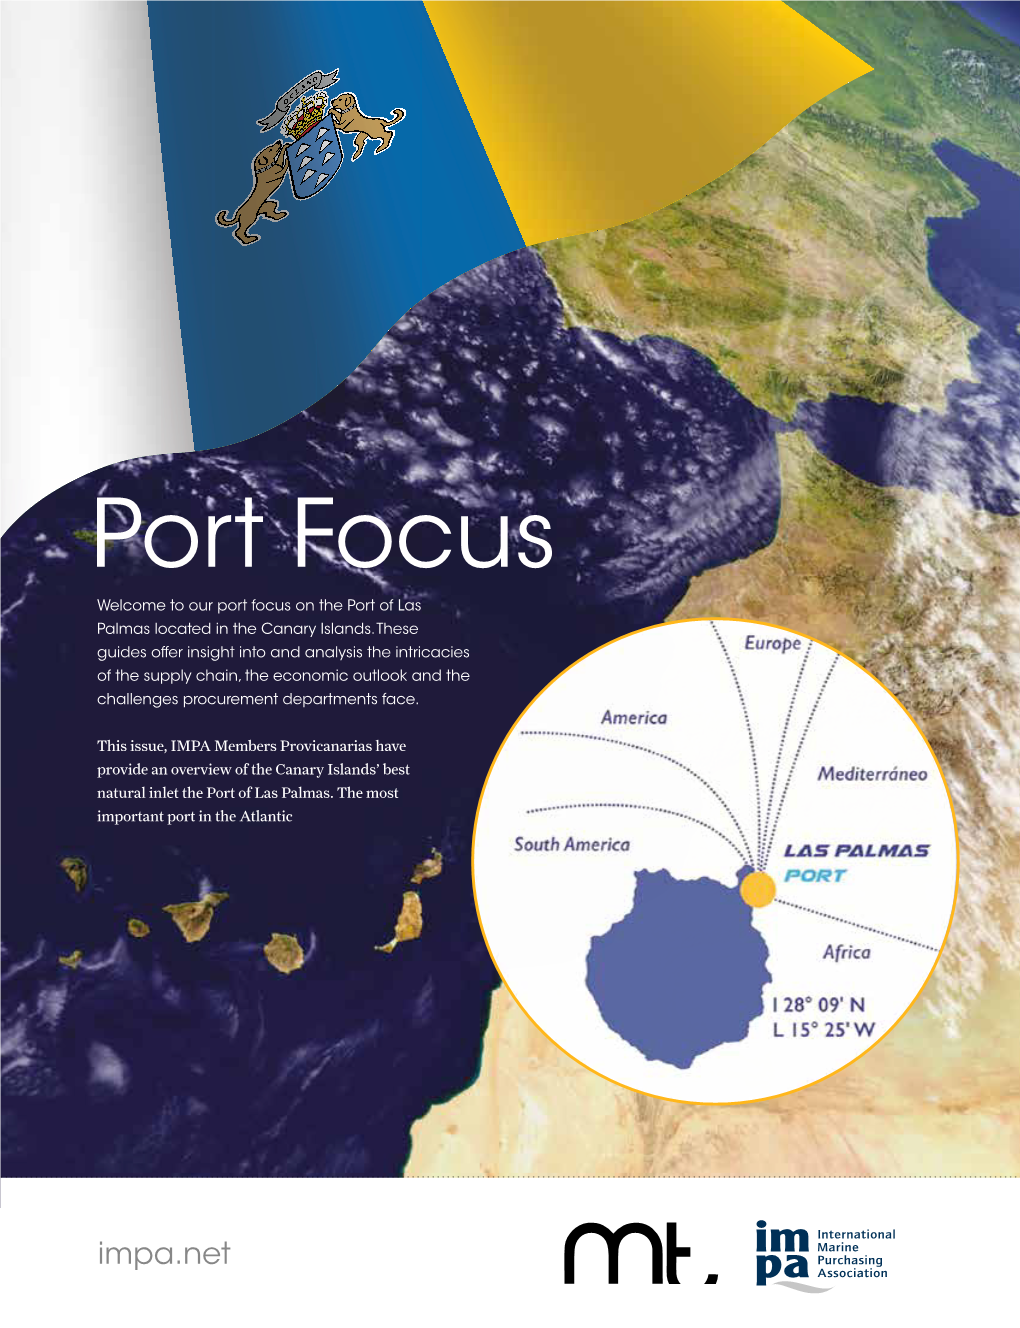 Port Focus Welcome to Our Port Focus on the Port of Las Palmas Located in the Canary Islands